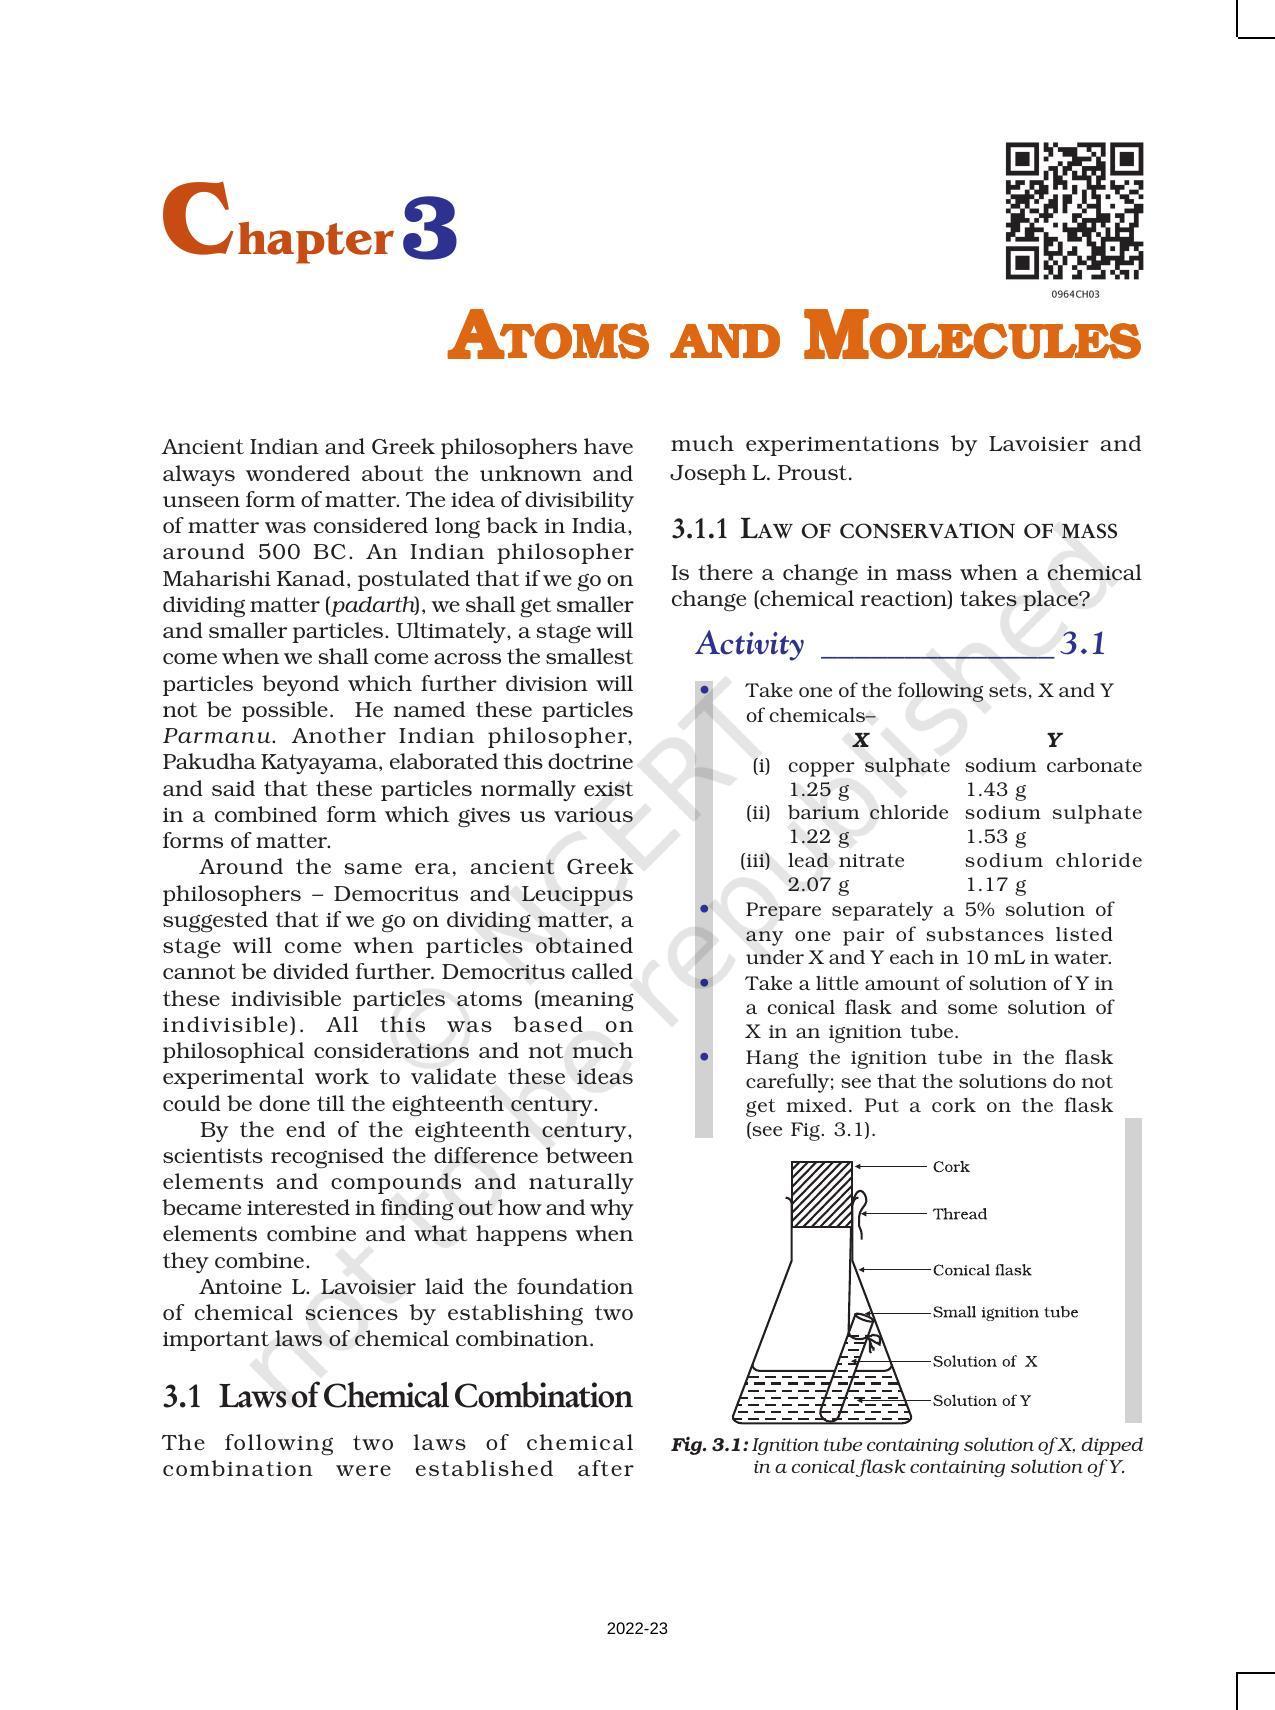 NCERT Book for Class 9 Science Chapter 3 Atoms And Molecules - Page 1